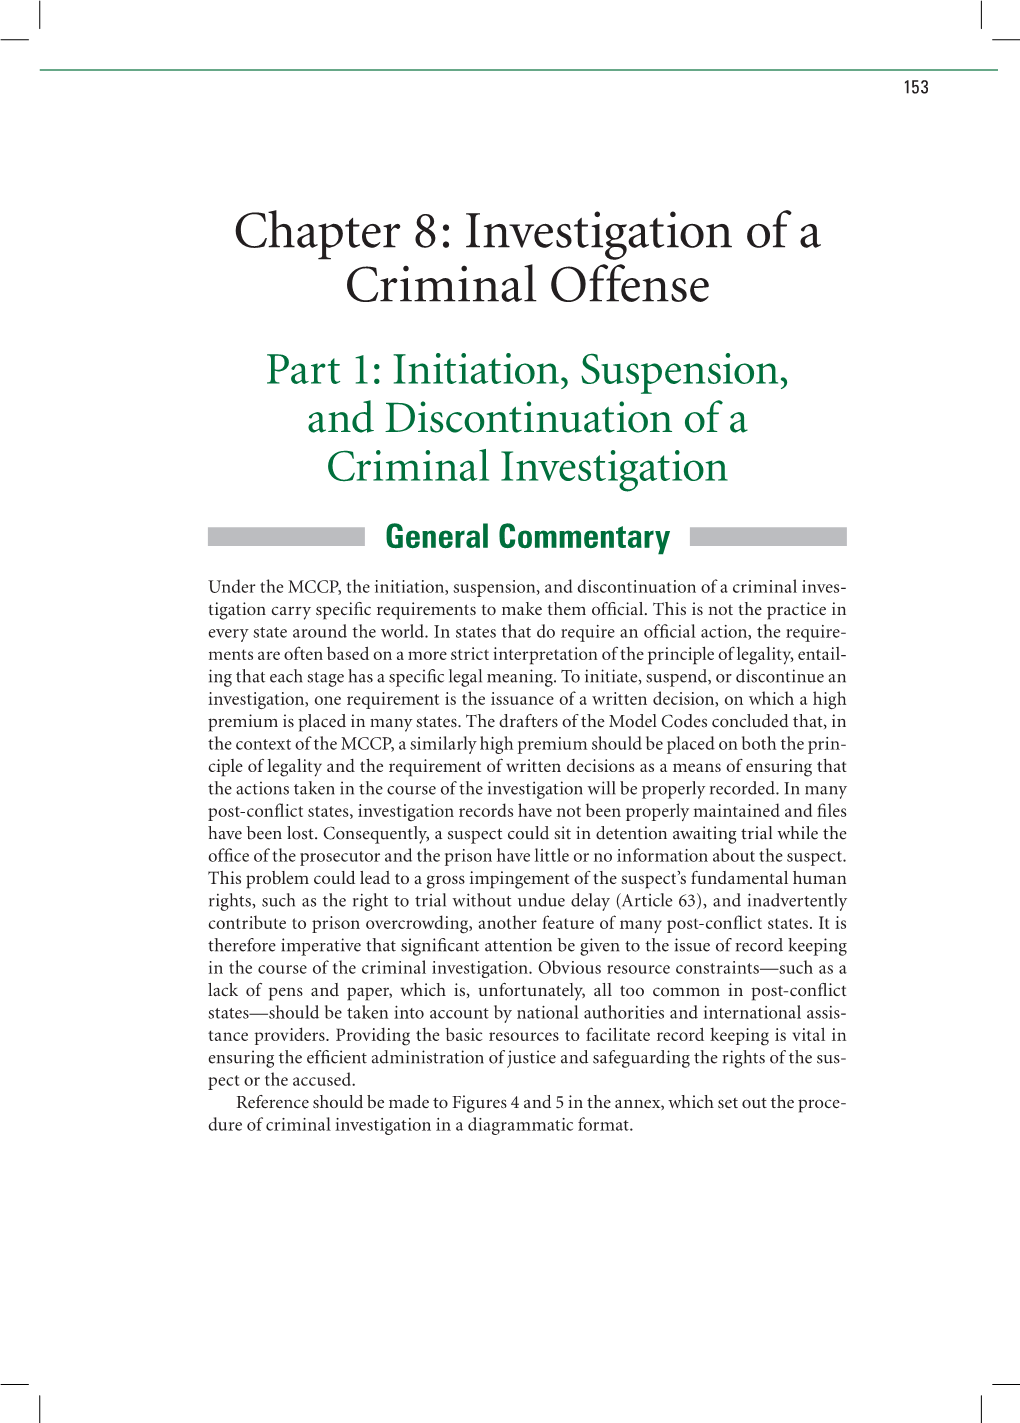 Investigation of a Criminal Offense Part 1: Initiation, Suspension, and Discontinuation of a Criminal Investigation General Commentary